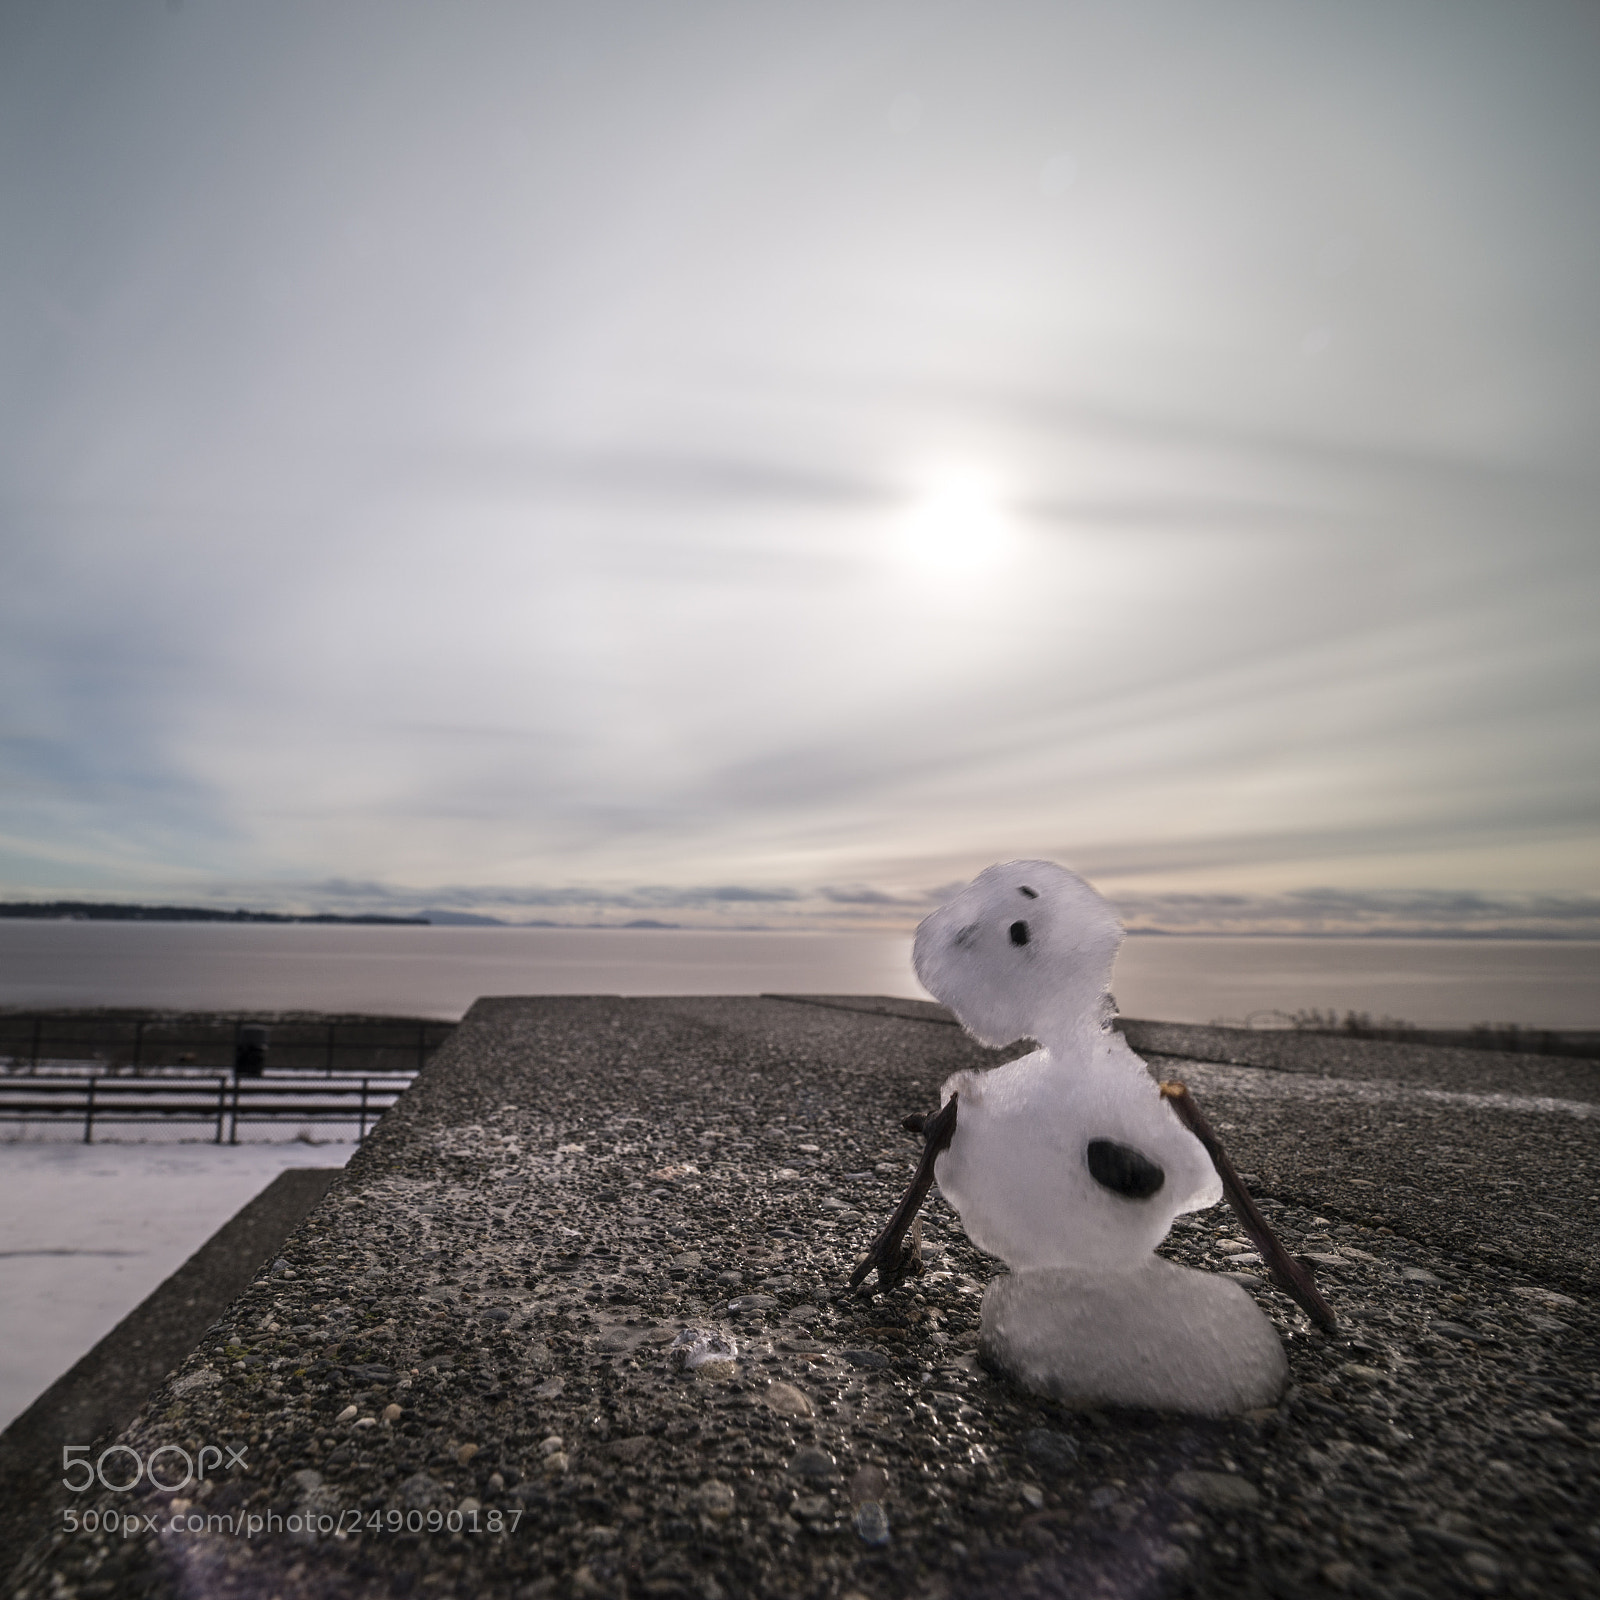 Sony a7R III sample photo. The melting snowman of photography